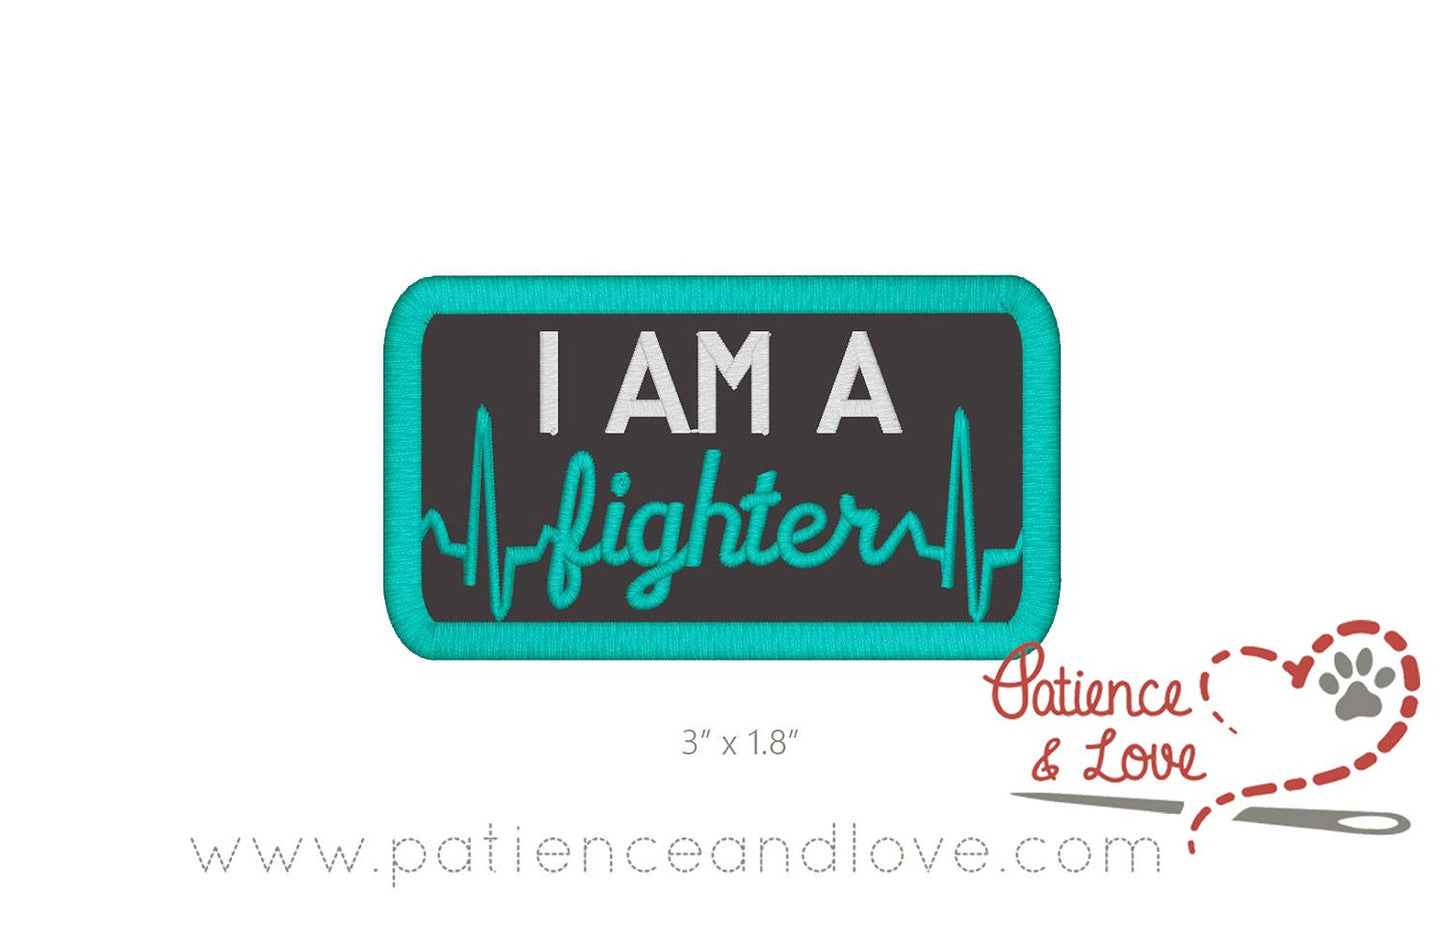 One sew on patch embroidered with  I AM A fighter  and an ekg line.  As seen in the listing photo. The listing photo shows black fabric, white and 1799 text.  Boarder is 1799.